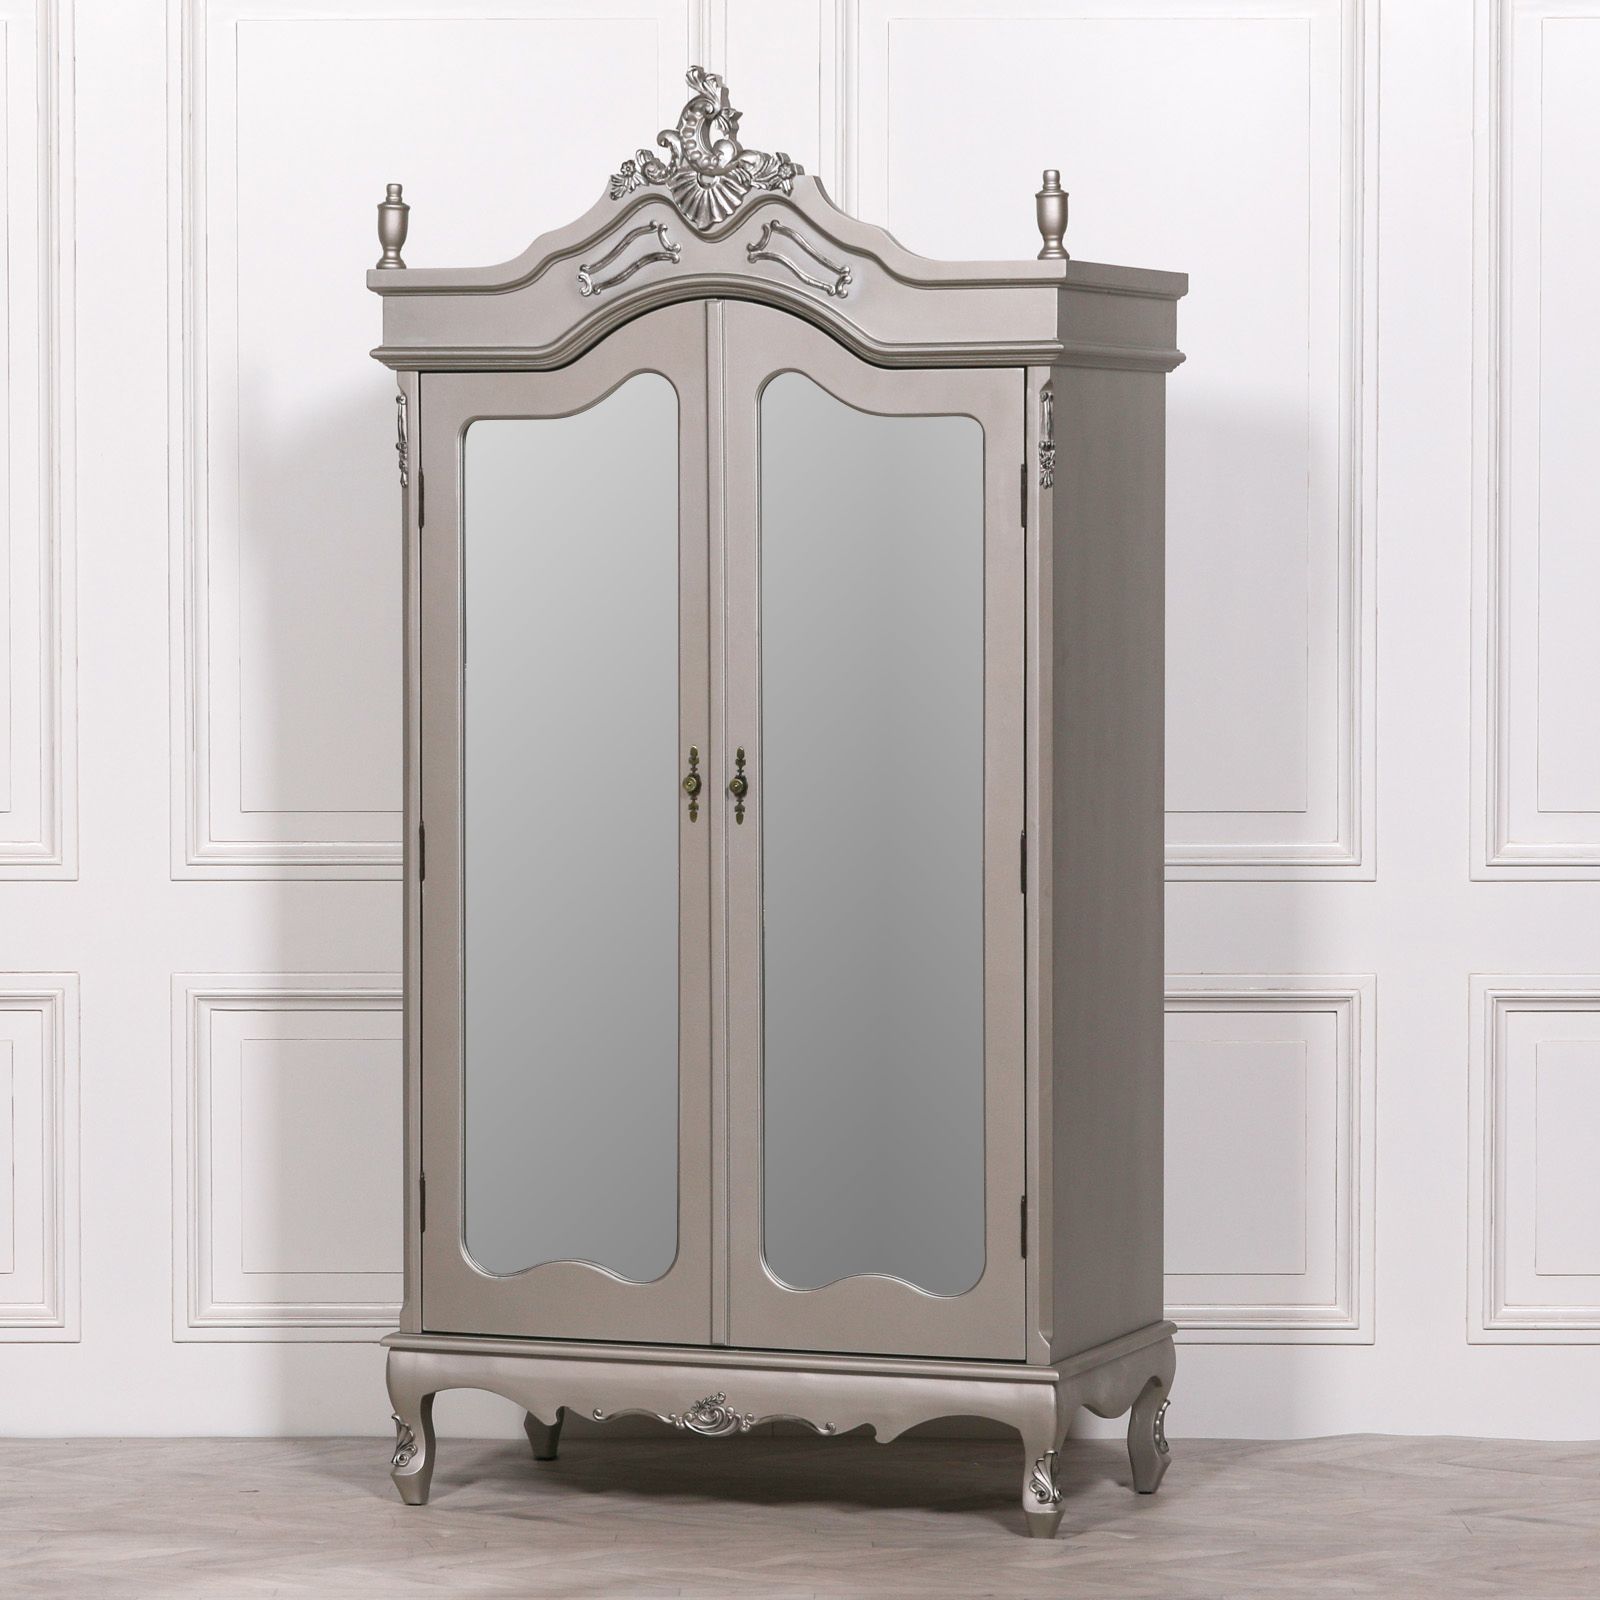 French Style Double Armoire Silver Wardrobe Mirrored Doors Regarding Silver French Wardrobes (View 5 of 20)